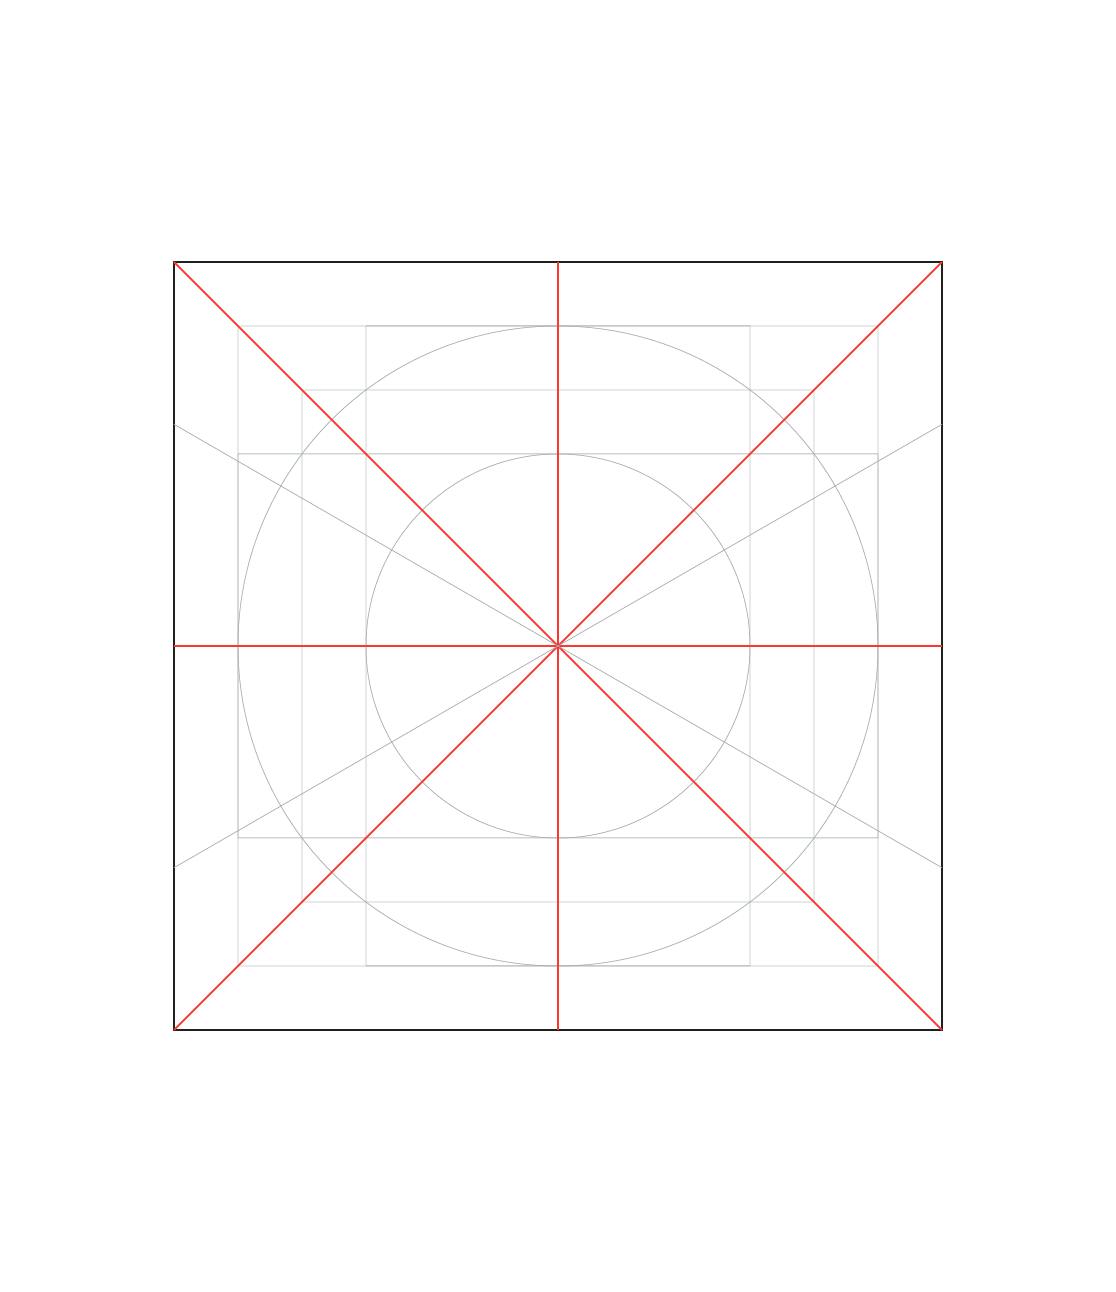 Within the established grid system, the centered vertical line, centered horizontal line, line that extends from the top left corner to the bottom right corner, and line that extend from the bottom left corner to the top right corner are highlighted in red.